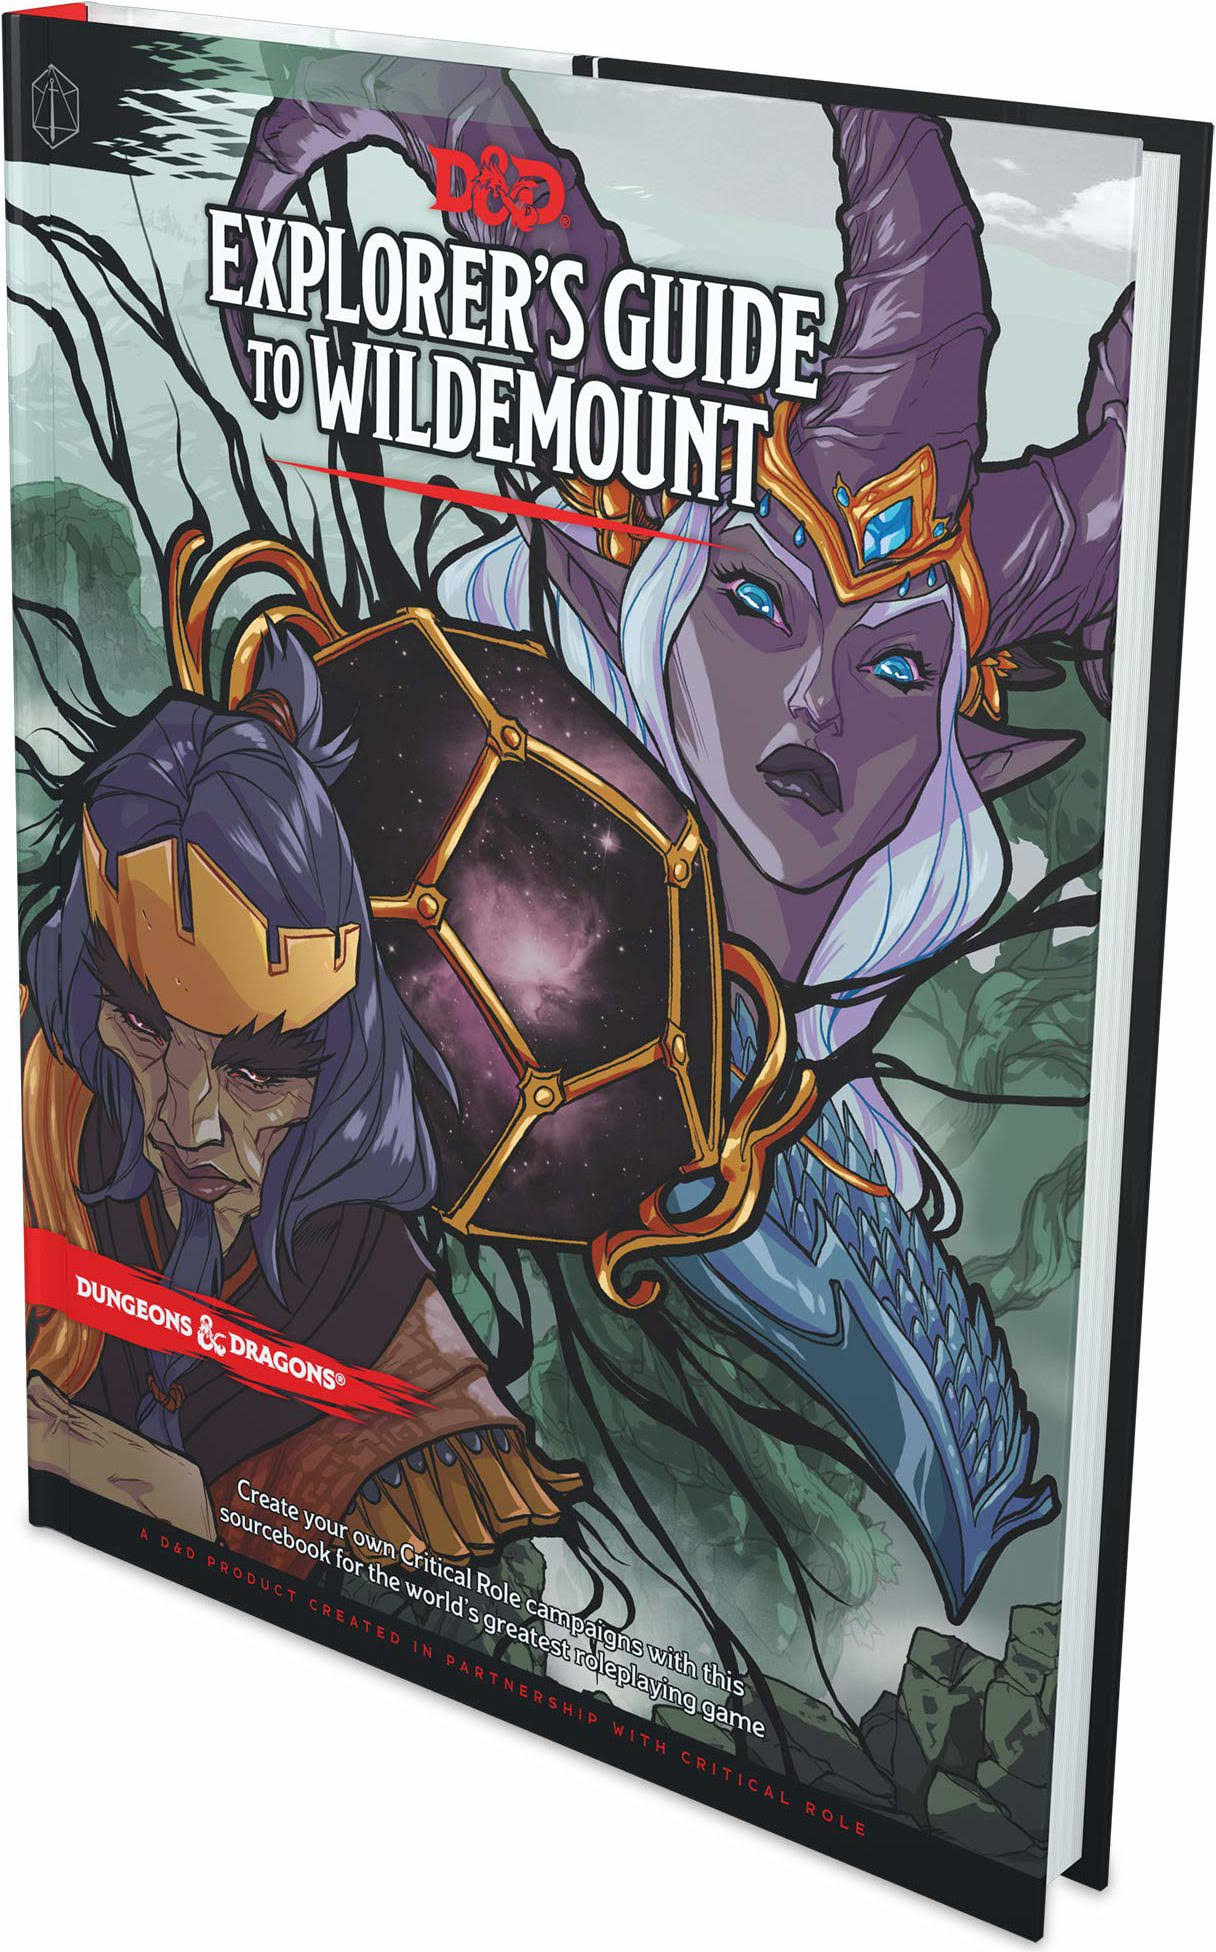 Explorer's Guide to Wildemount (D&D Campaign Setting and Adventure Book) (Dungeons & Dragons) [Book]